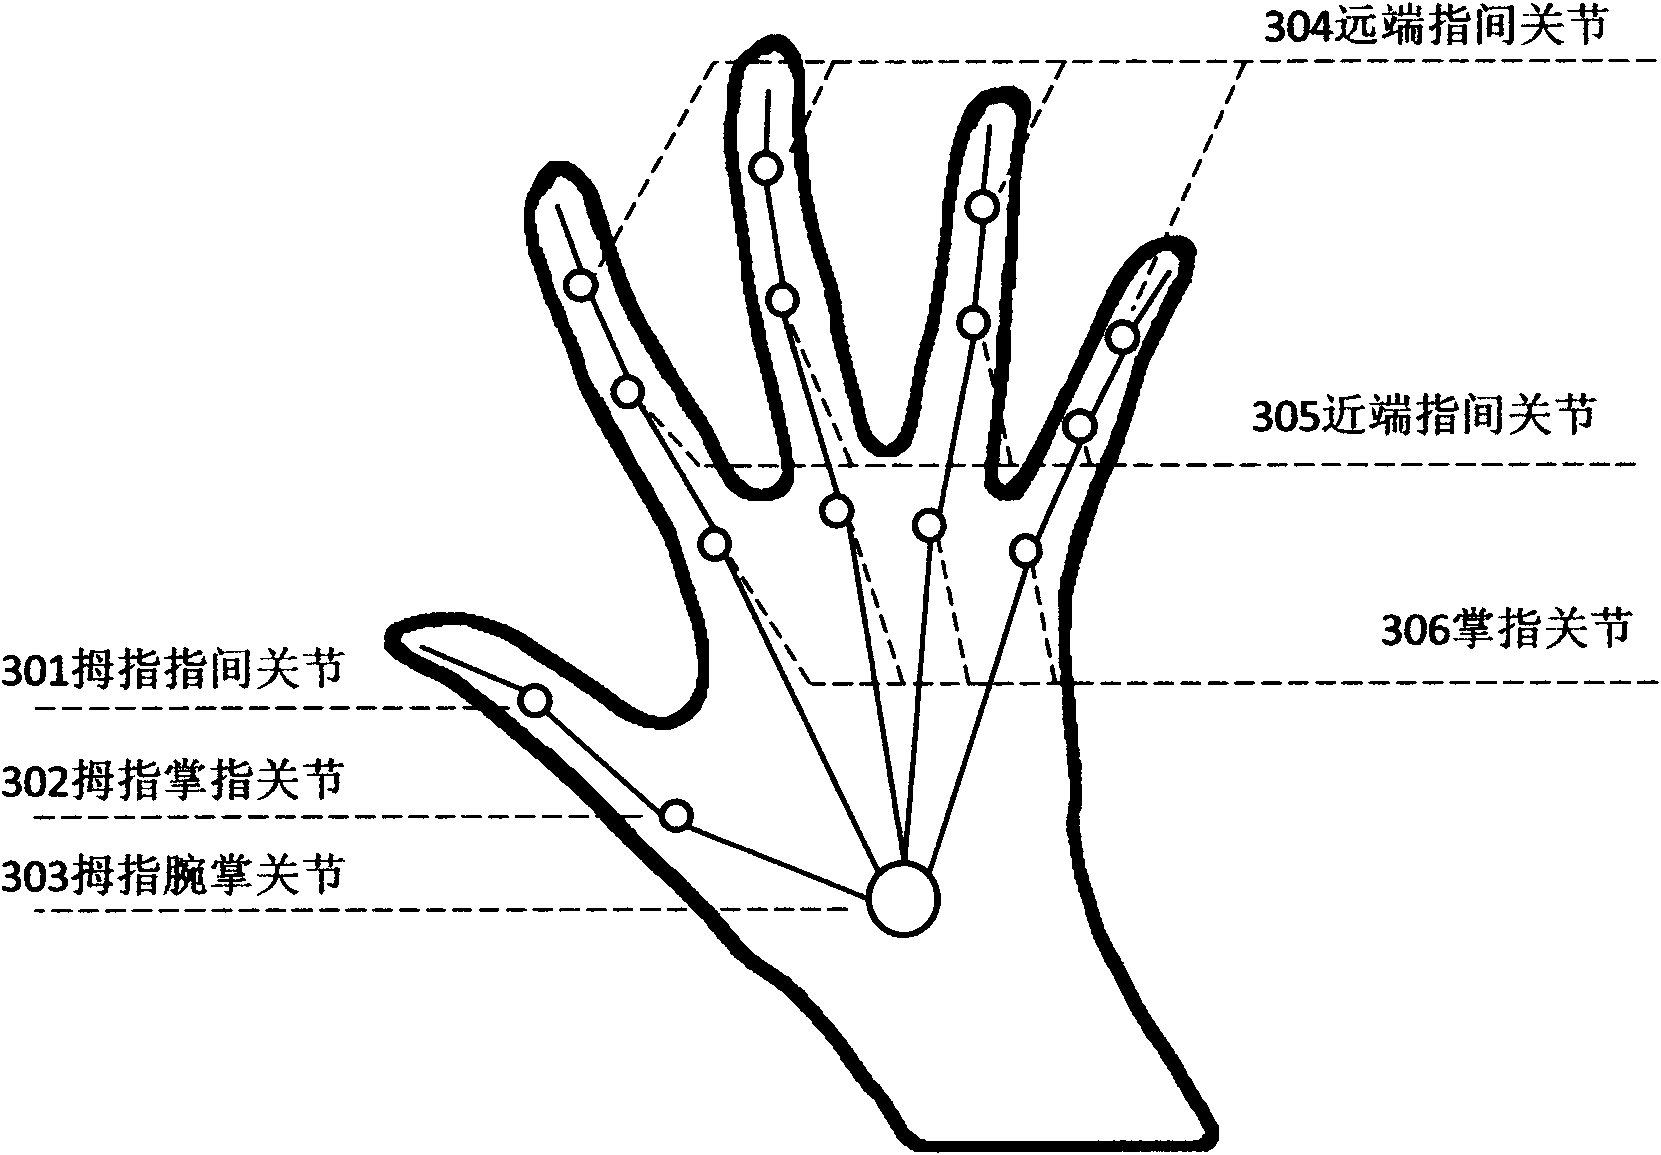 Sensing method for gesture and spatial location of hand